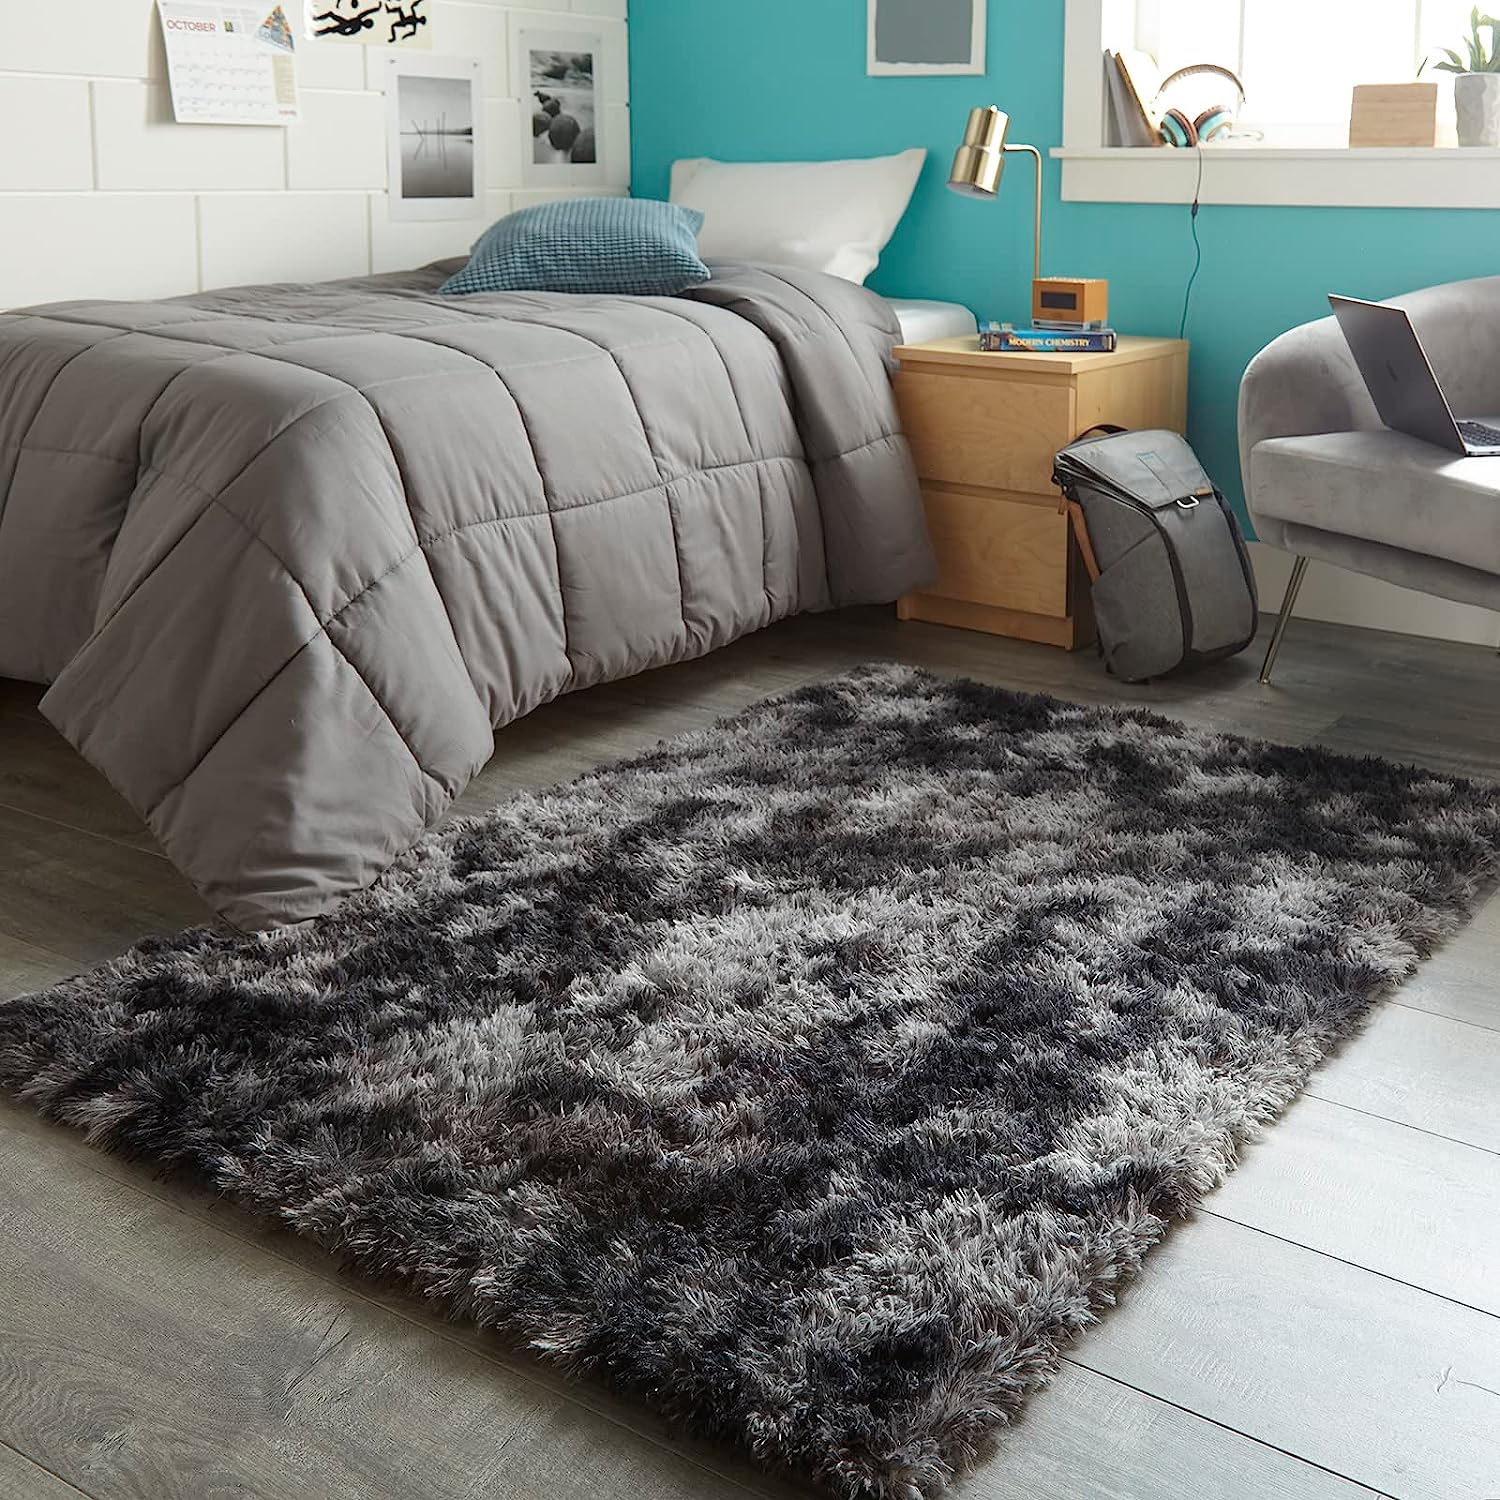 Ophanie Rugs for Bedroom, Machine Washable Fluffy [...]